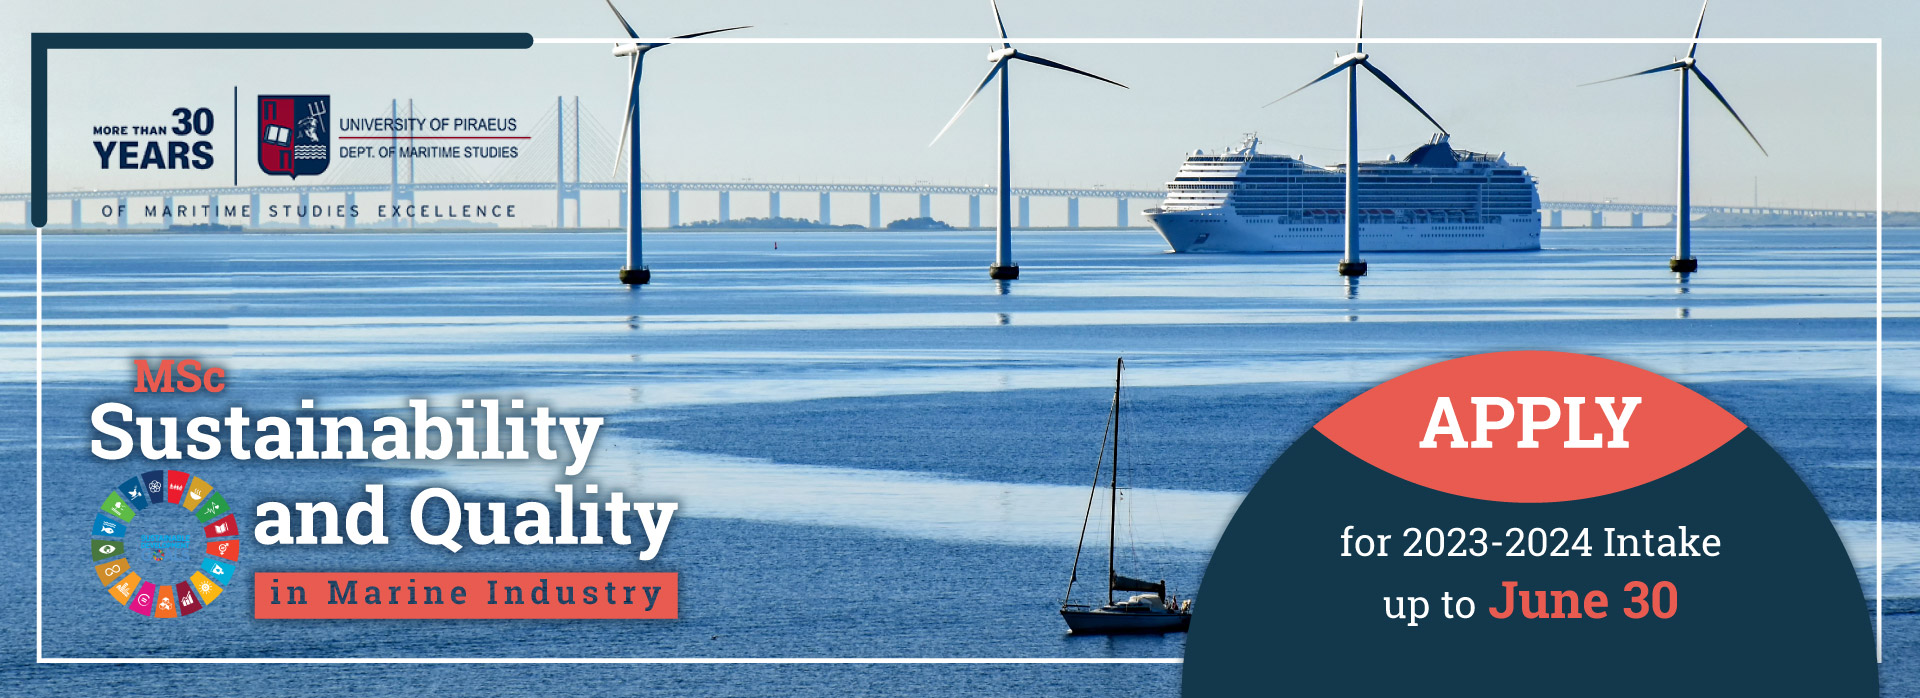 MSc Sustainability and Quality in Marine Industry